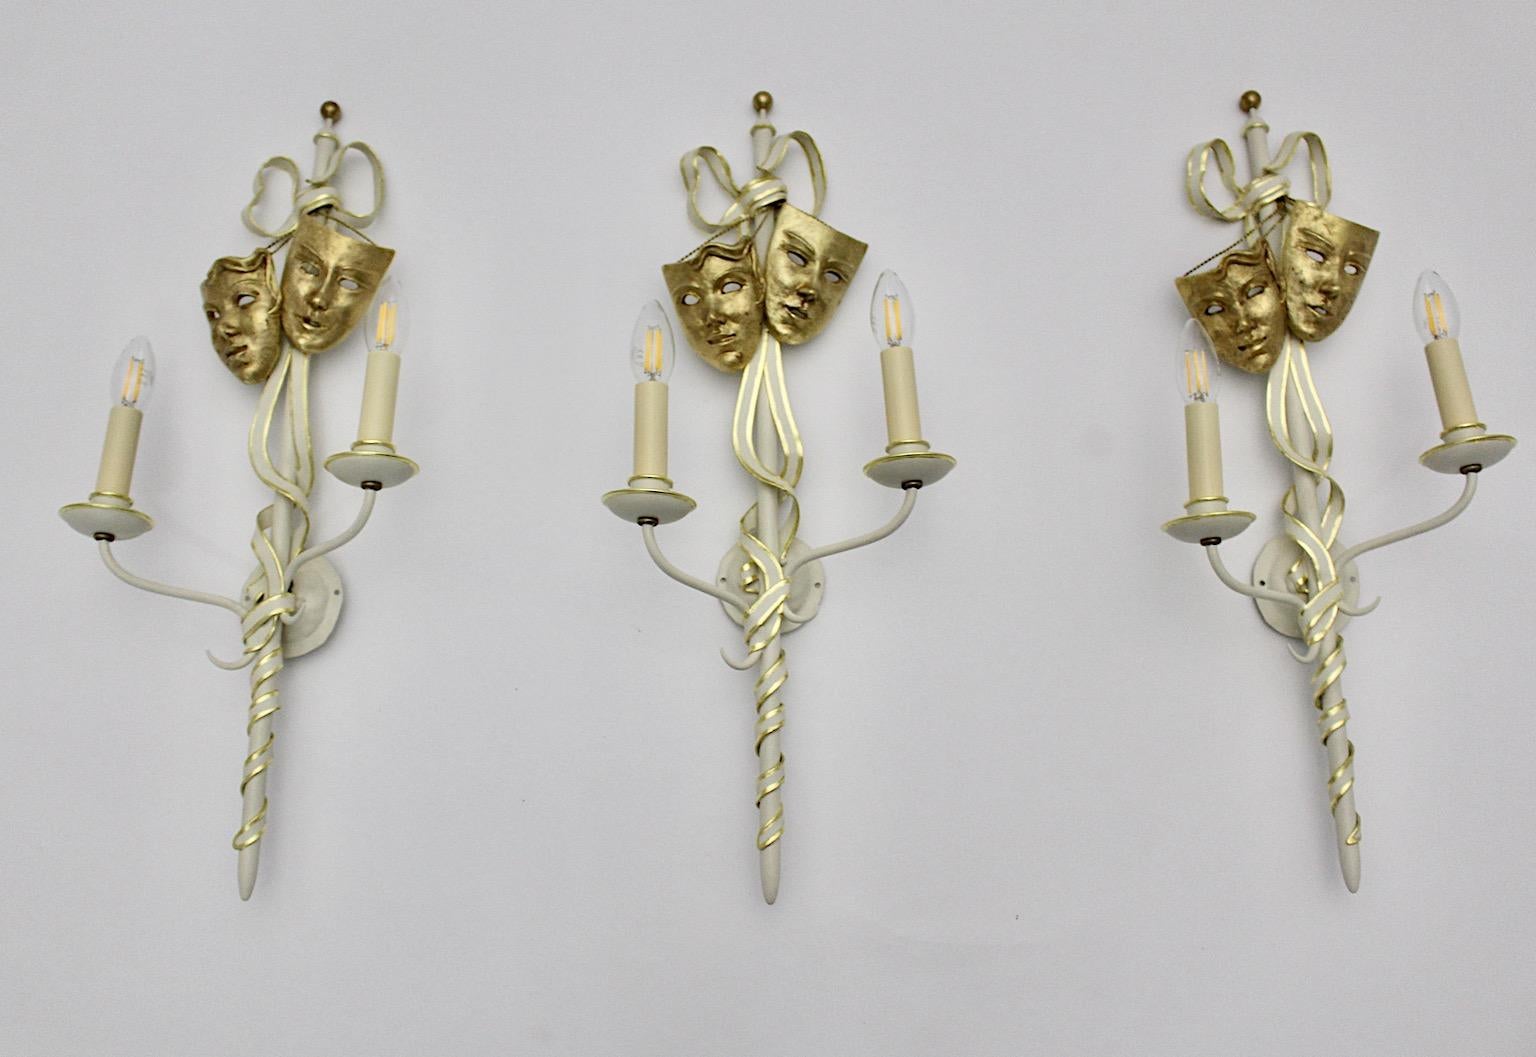  Mid-Century Modern vintage gold and white three ( 3 ) sconces or wall lights from metal with gilded details and solid brass masks, Italy 1940s.
The rare and beautiful hand made sconces were designed in Italy 1940s.
The sconces or wall lights made